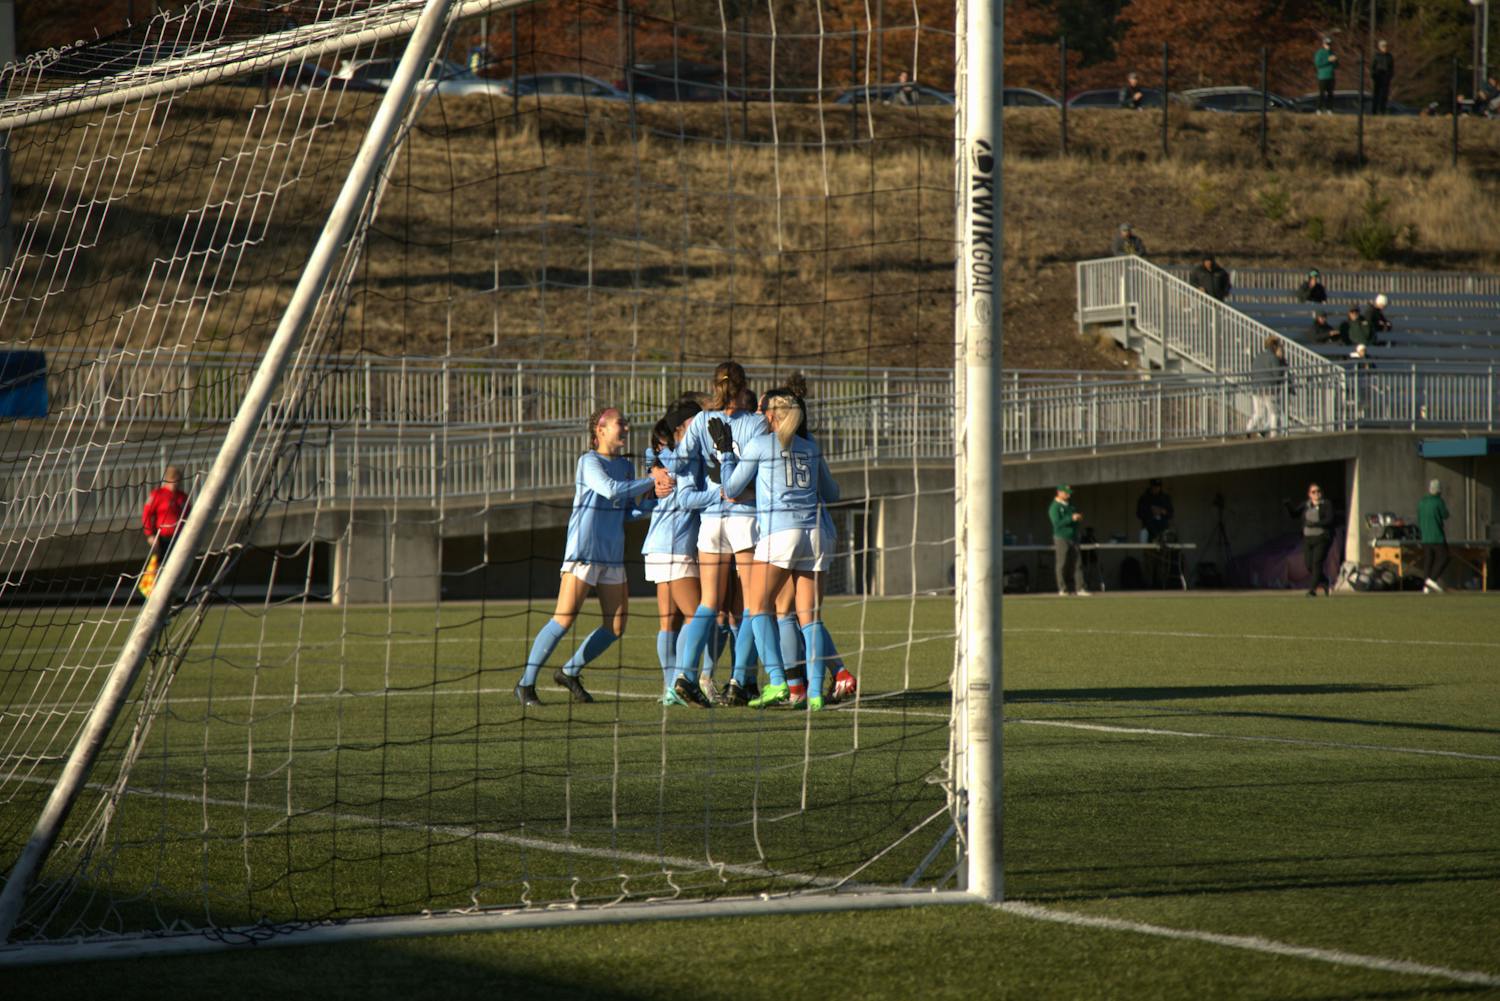 Western women’s soccer team celebrates after an early goal from Morgan Manalili in their game against Concordia University Irvine on Thursday, Nov. 17 at Harrington Field. The only score of the match led to a Viking victory and their fifth regional Division II championship in program history. // Photo by Jack Glenn